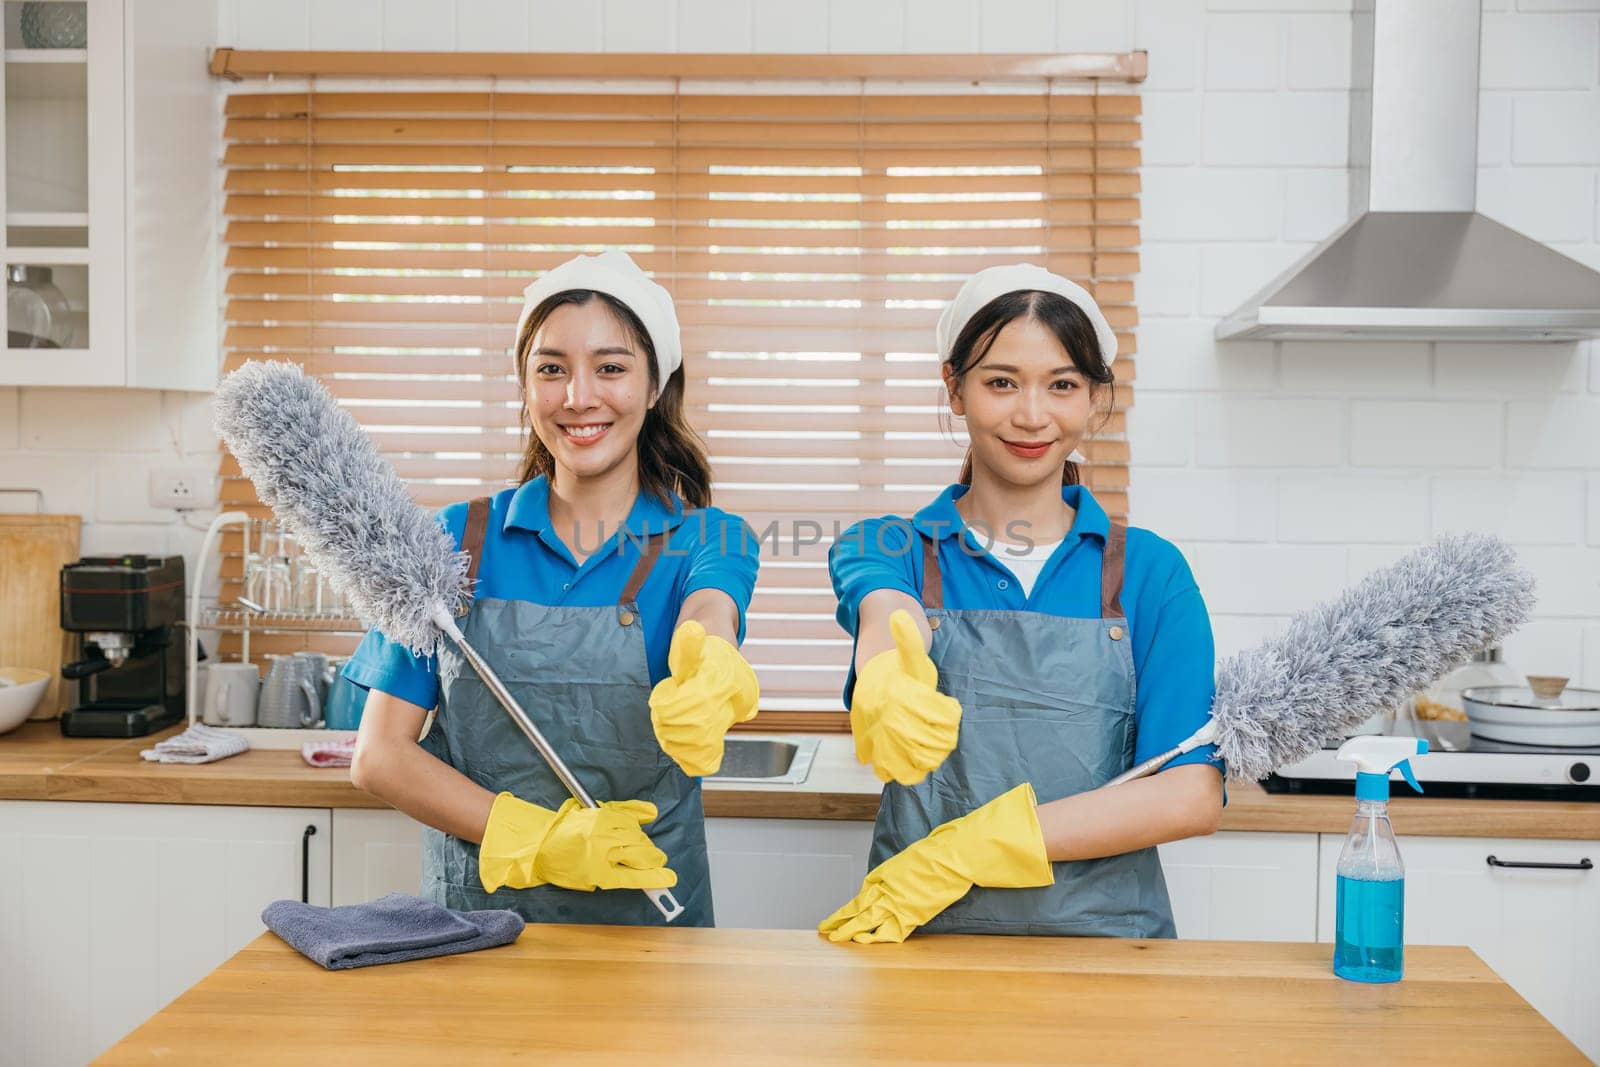 Two Asian cleaning service women on kitchen counter with duster foggy spray and rag illustrate effective housework teamwork. Clean portrait two uniform maid working smiling employee.